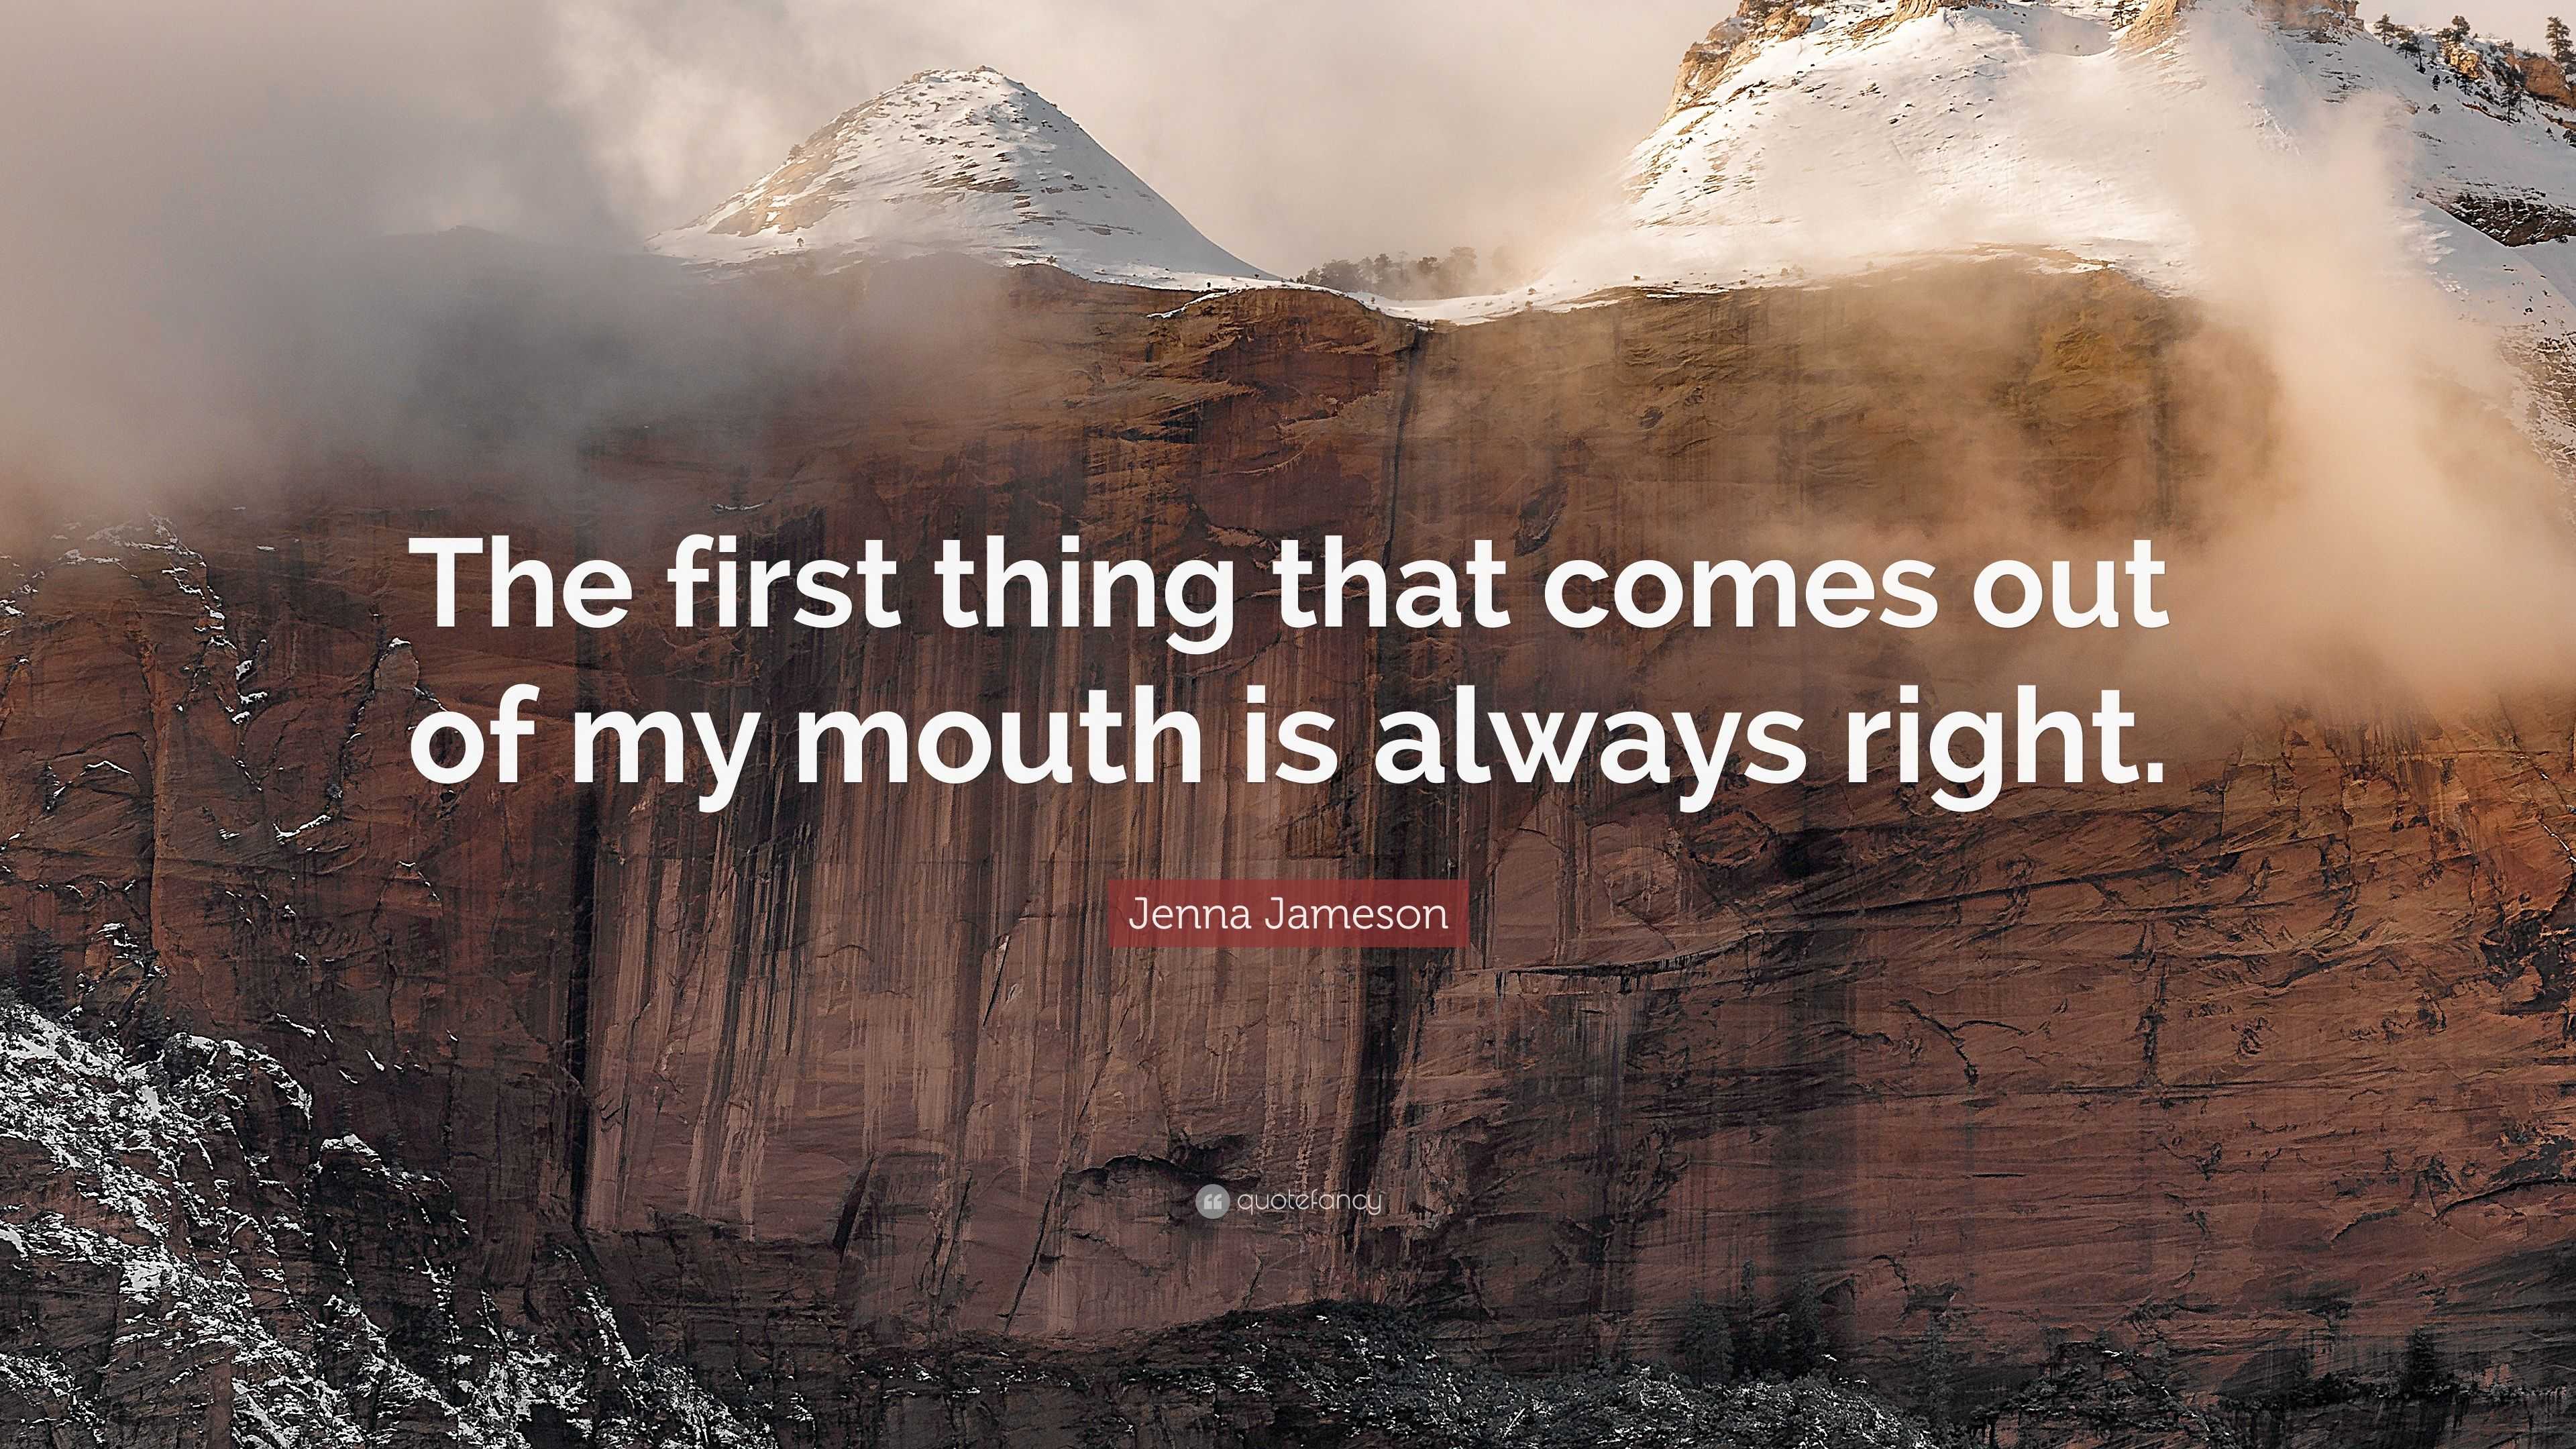 Jenna Jameson Quote: "The first thing that comes out of my mouth is always right." (7 wallpapers ...